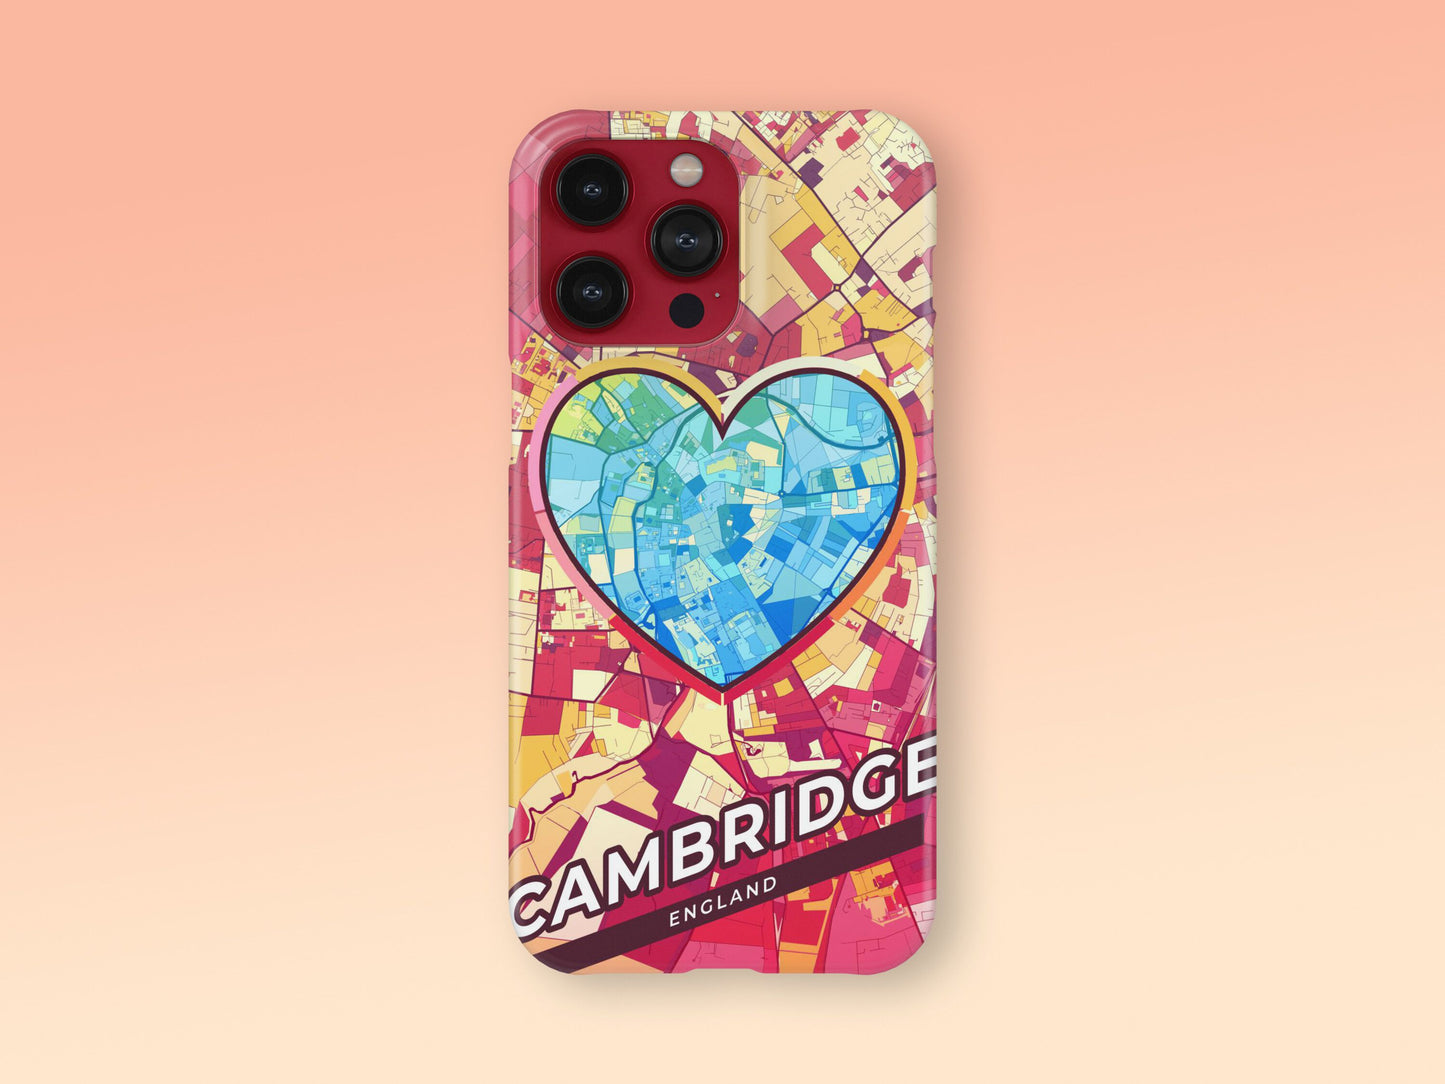 Cambridge England slim phone case with colorful icon. Birthday, wedding or housewarming gift. Couple match cases. 2